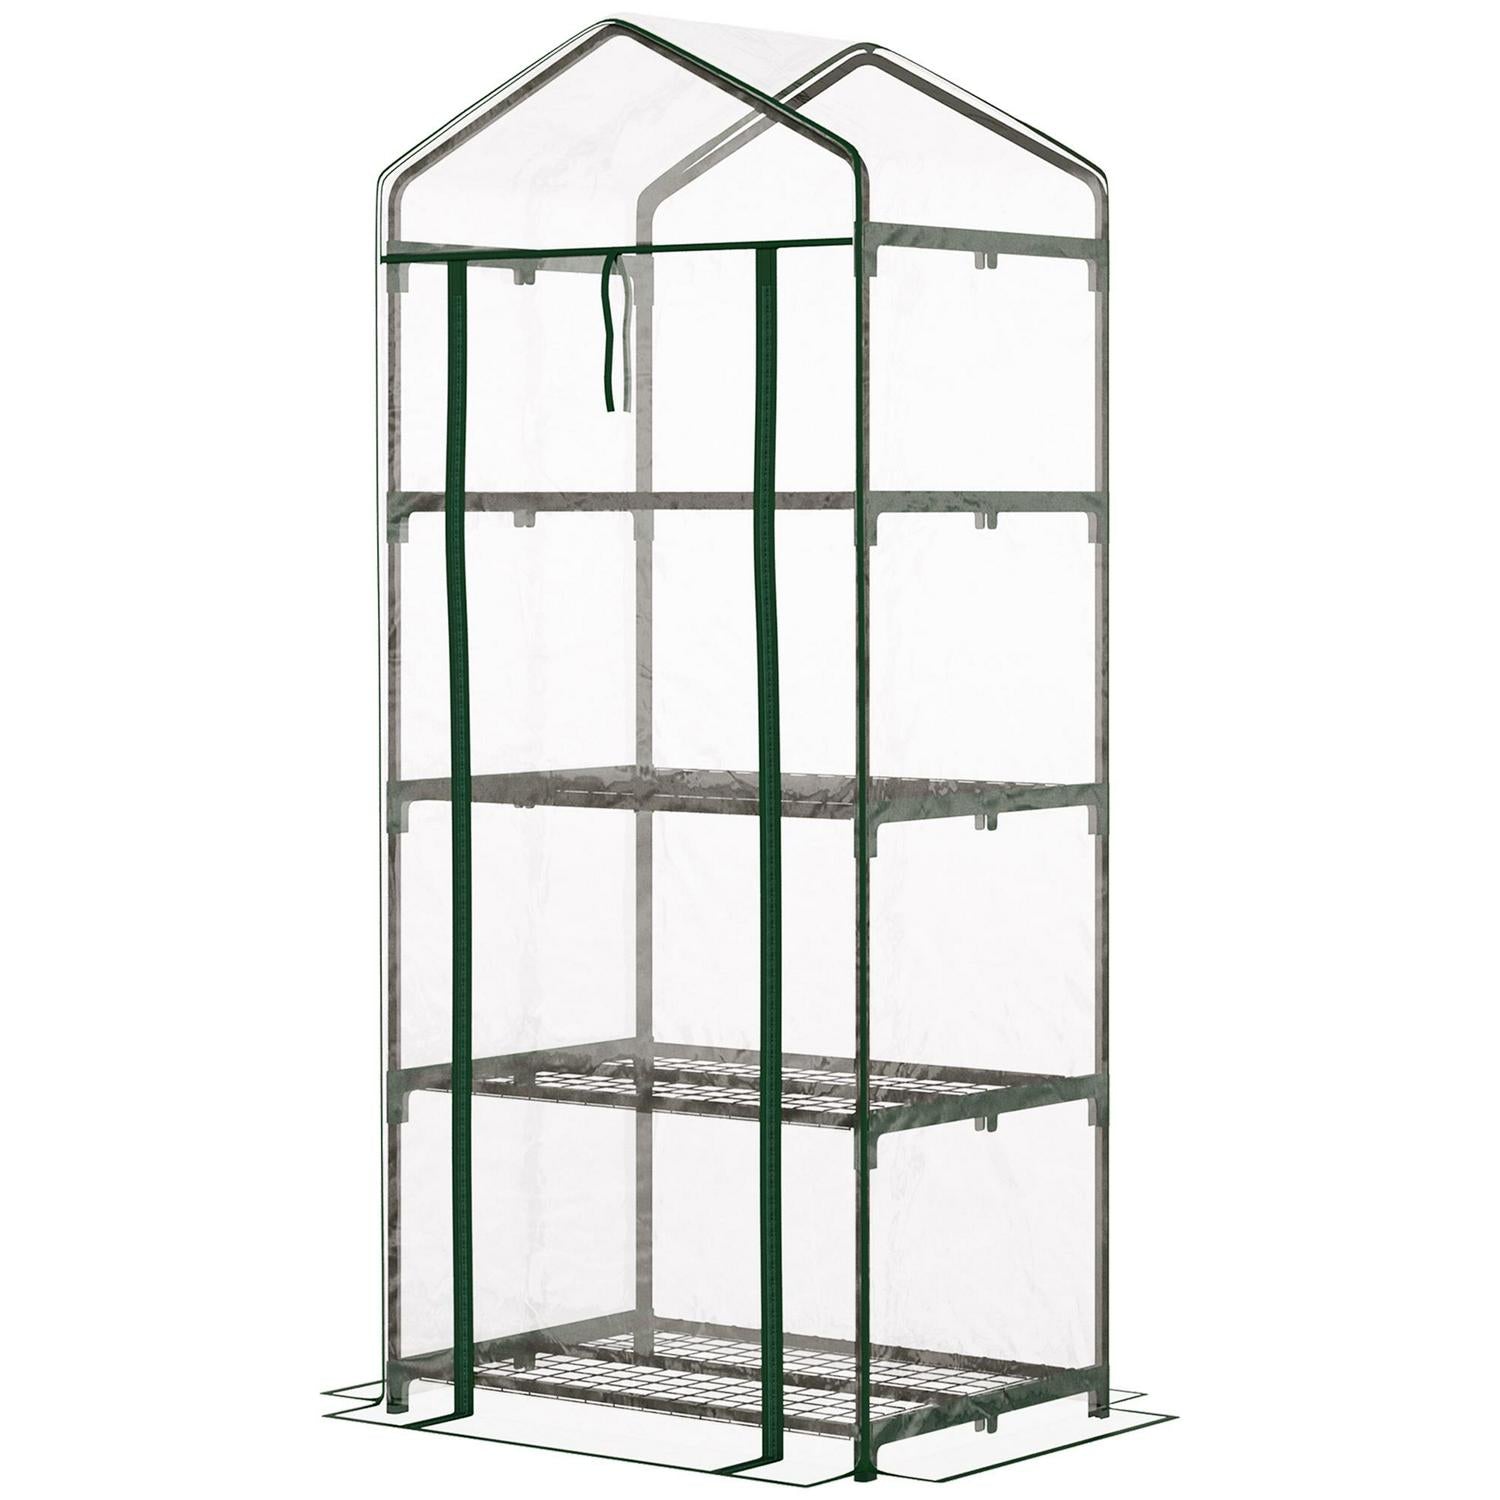 Portable 4-Tier Mini Greenhouse Plant Grow Shed W/ Clear Cover Outdoor